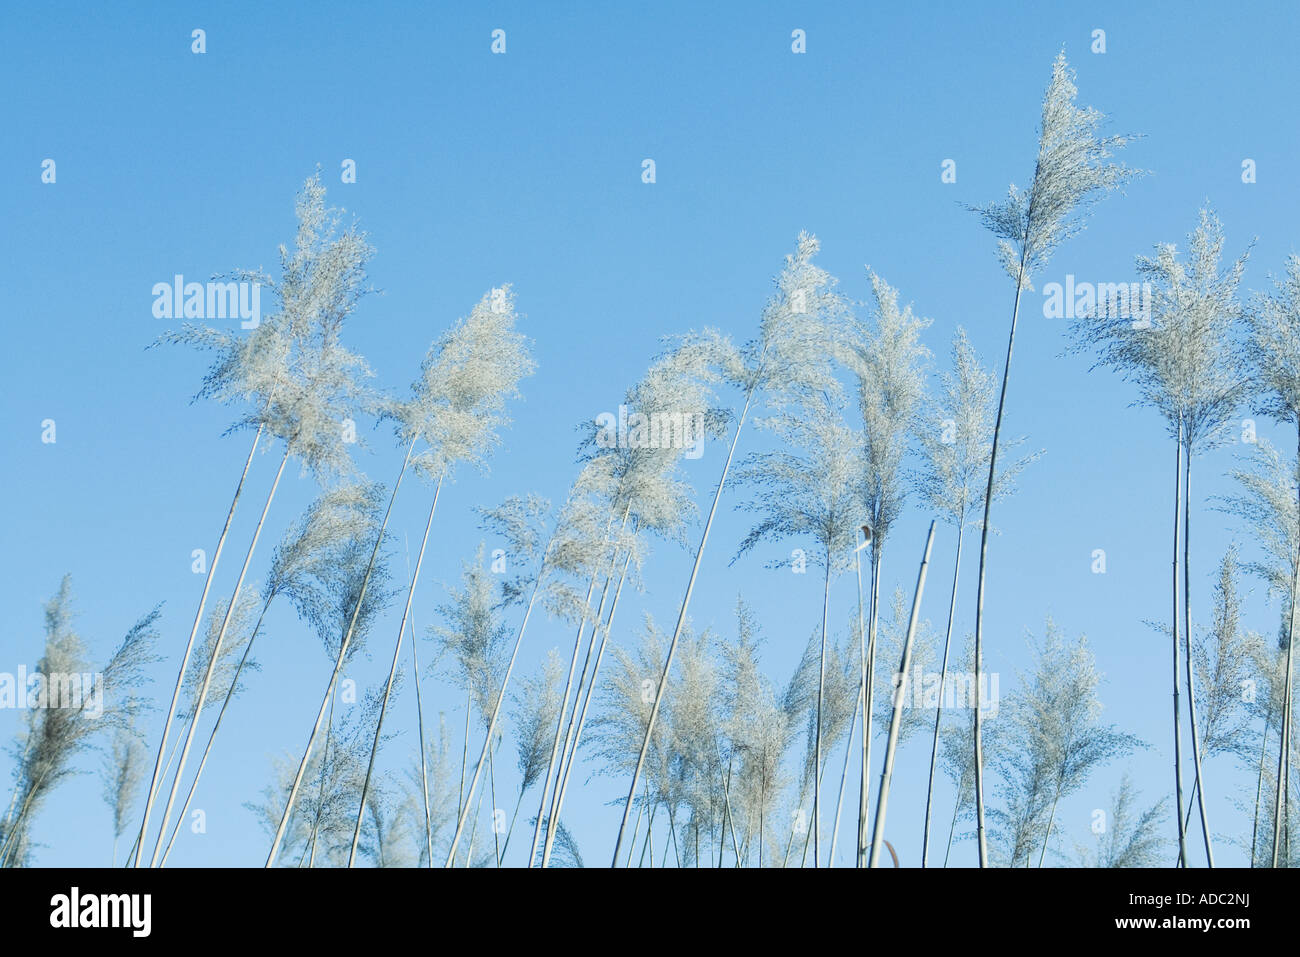 Japanese silver grass, low angle view Stock Photo